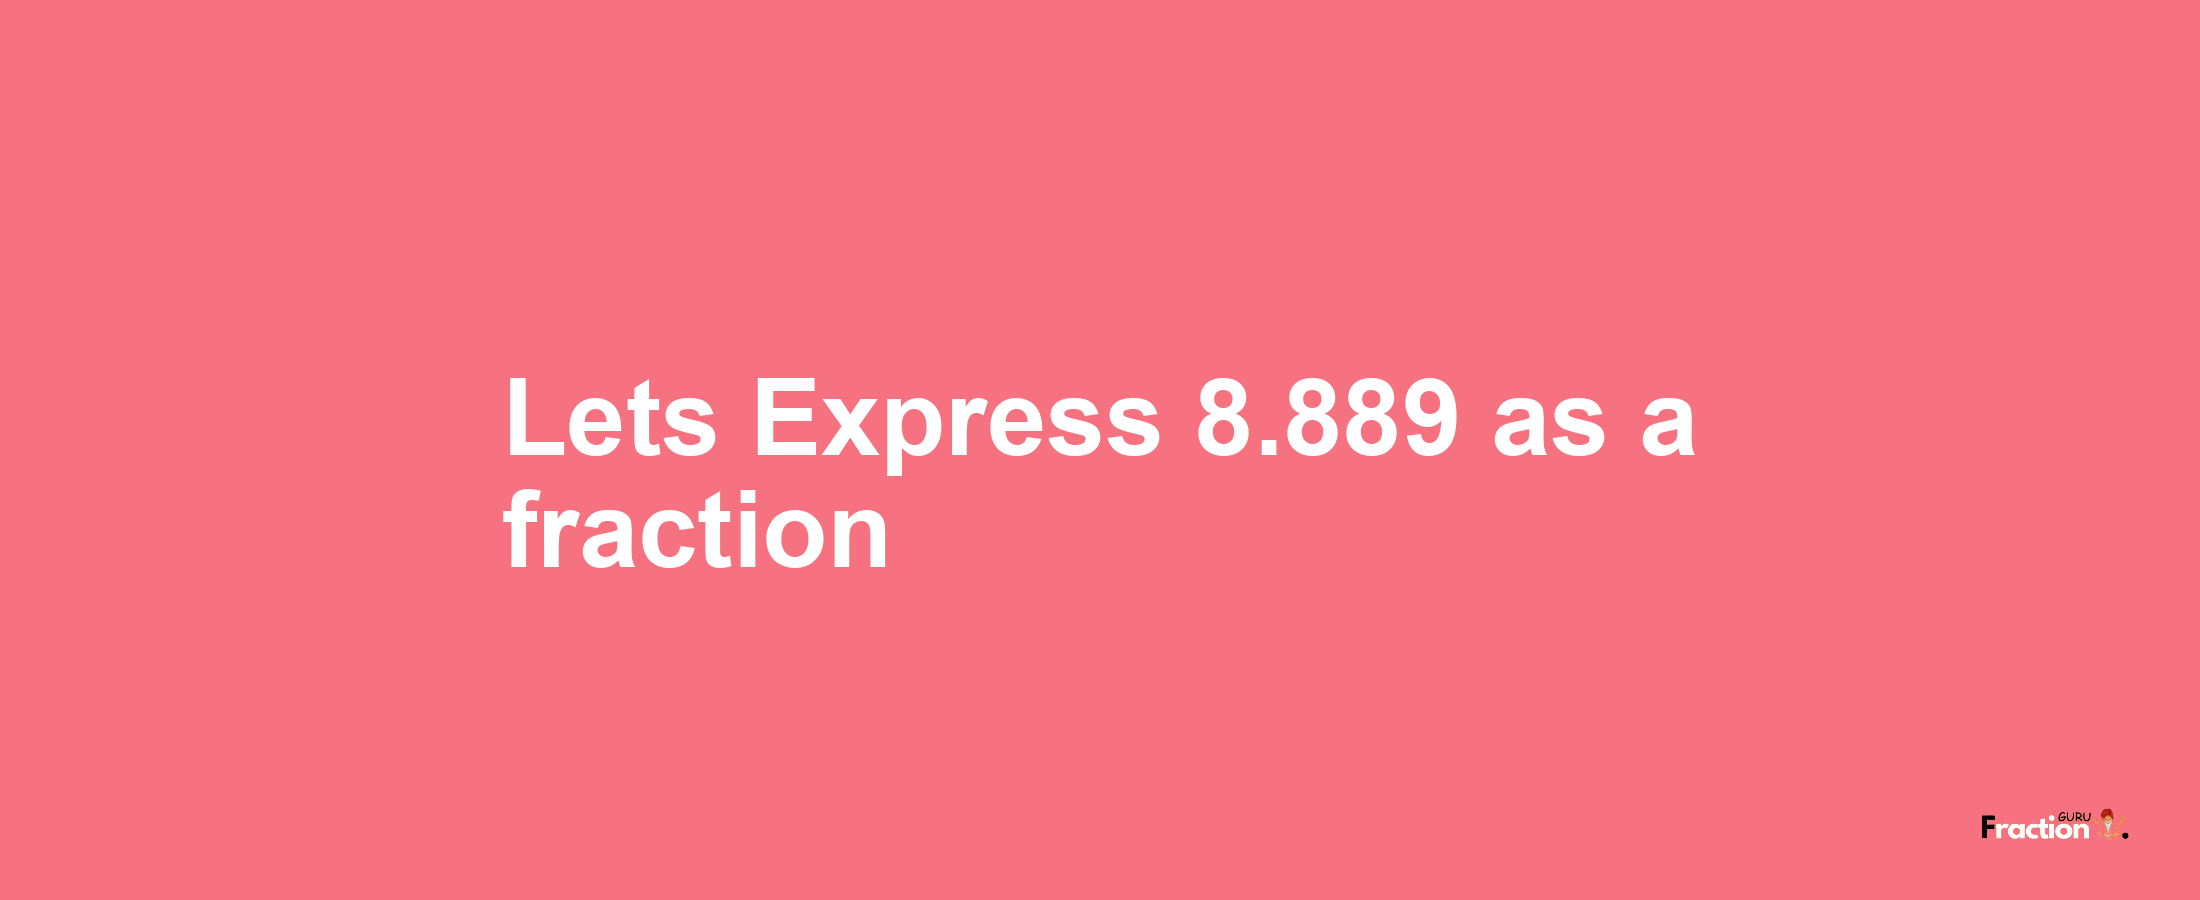 Lets Express 8.889 as afraction